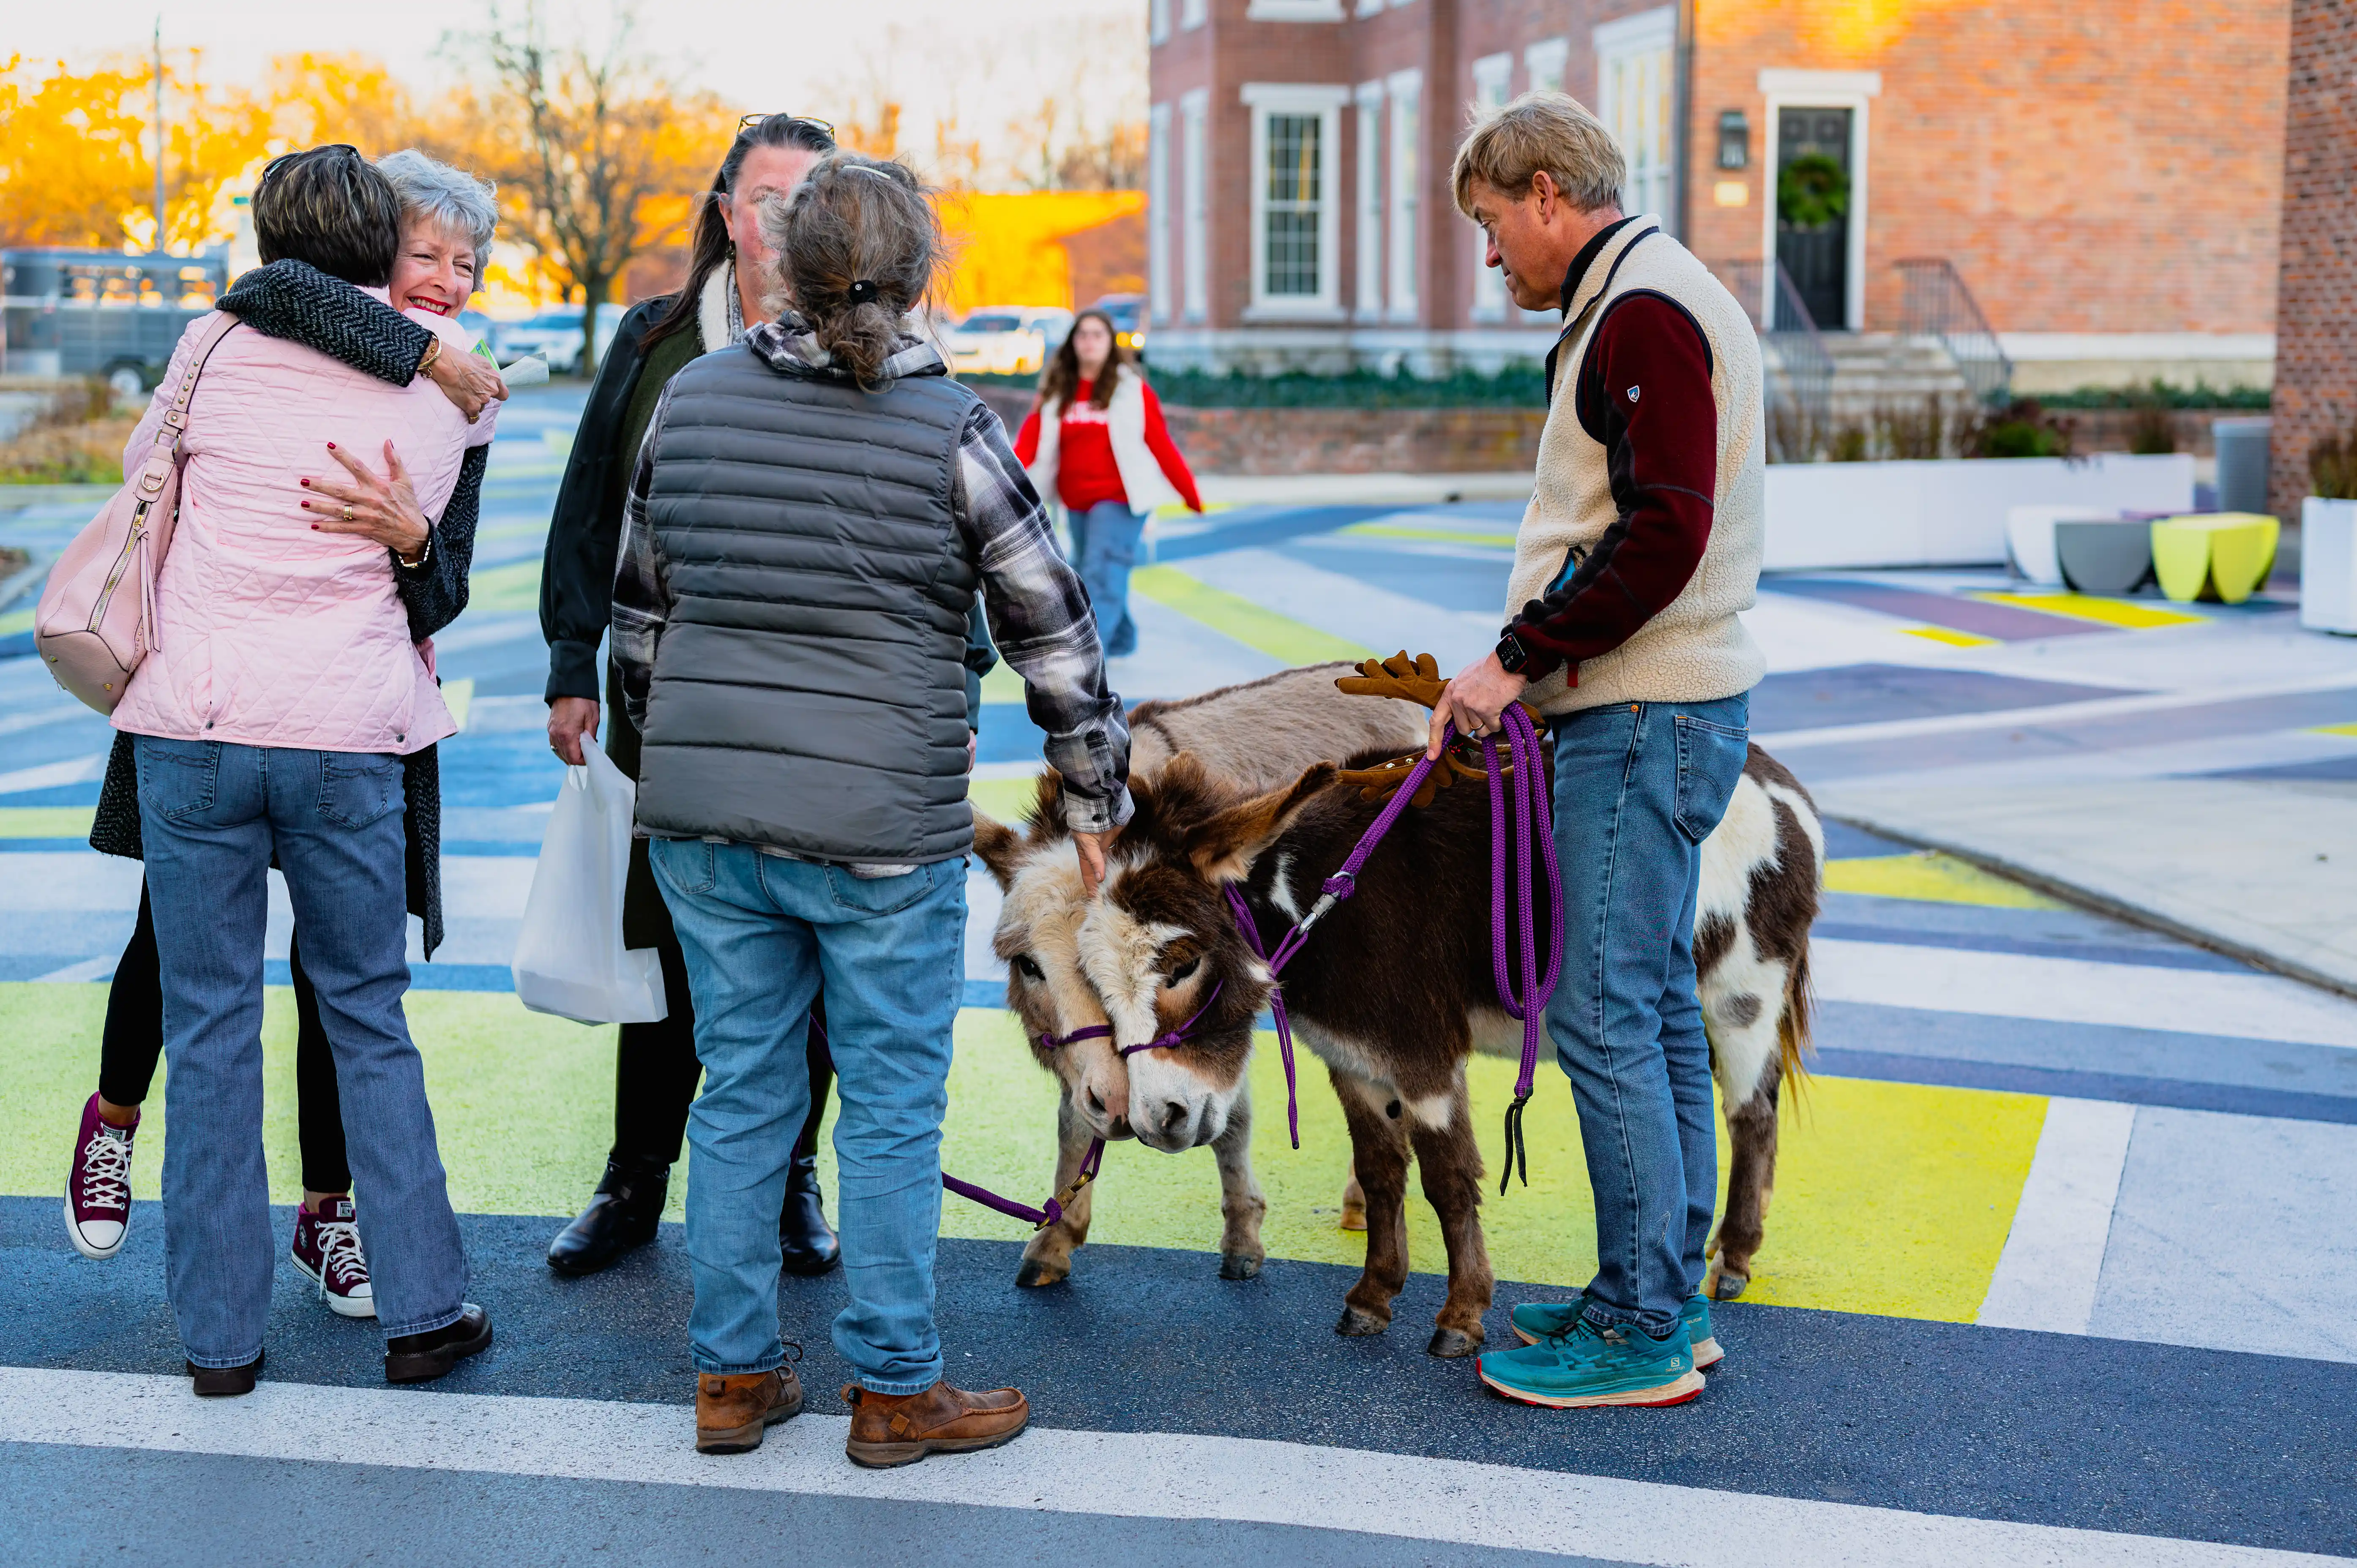 Group of people engaging with each other and a cow on a colorful urban crosswalk.